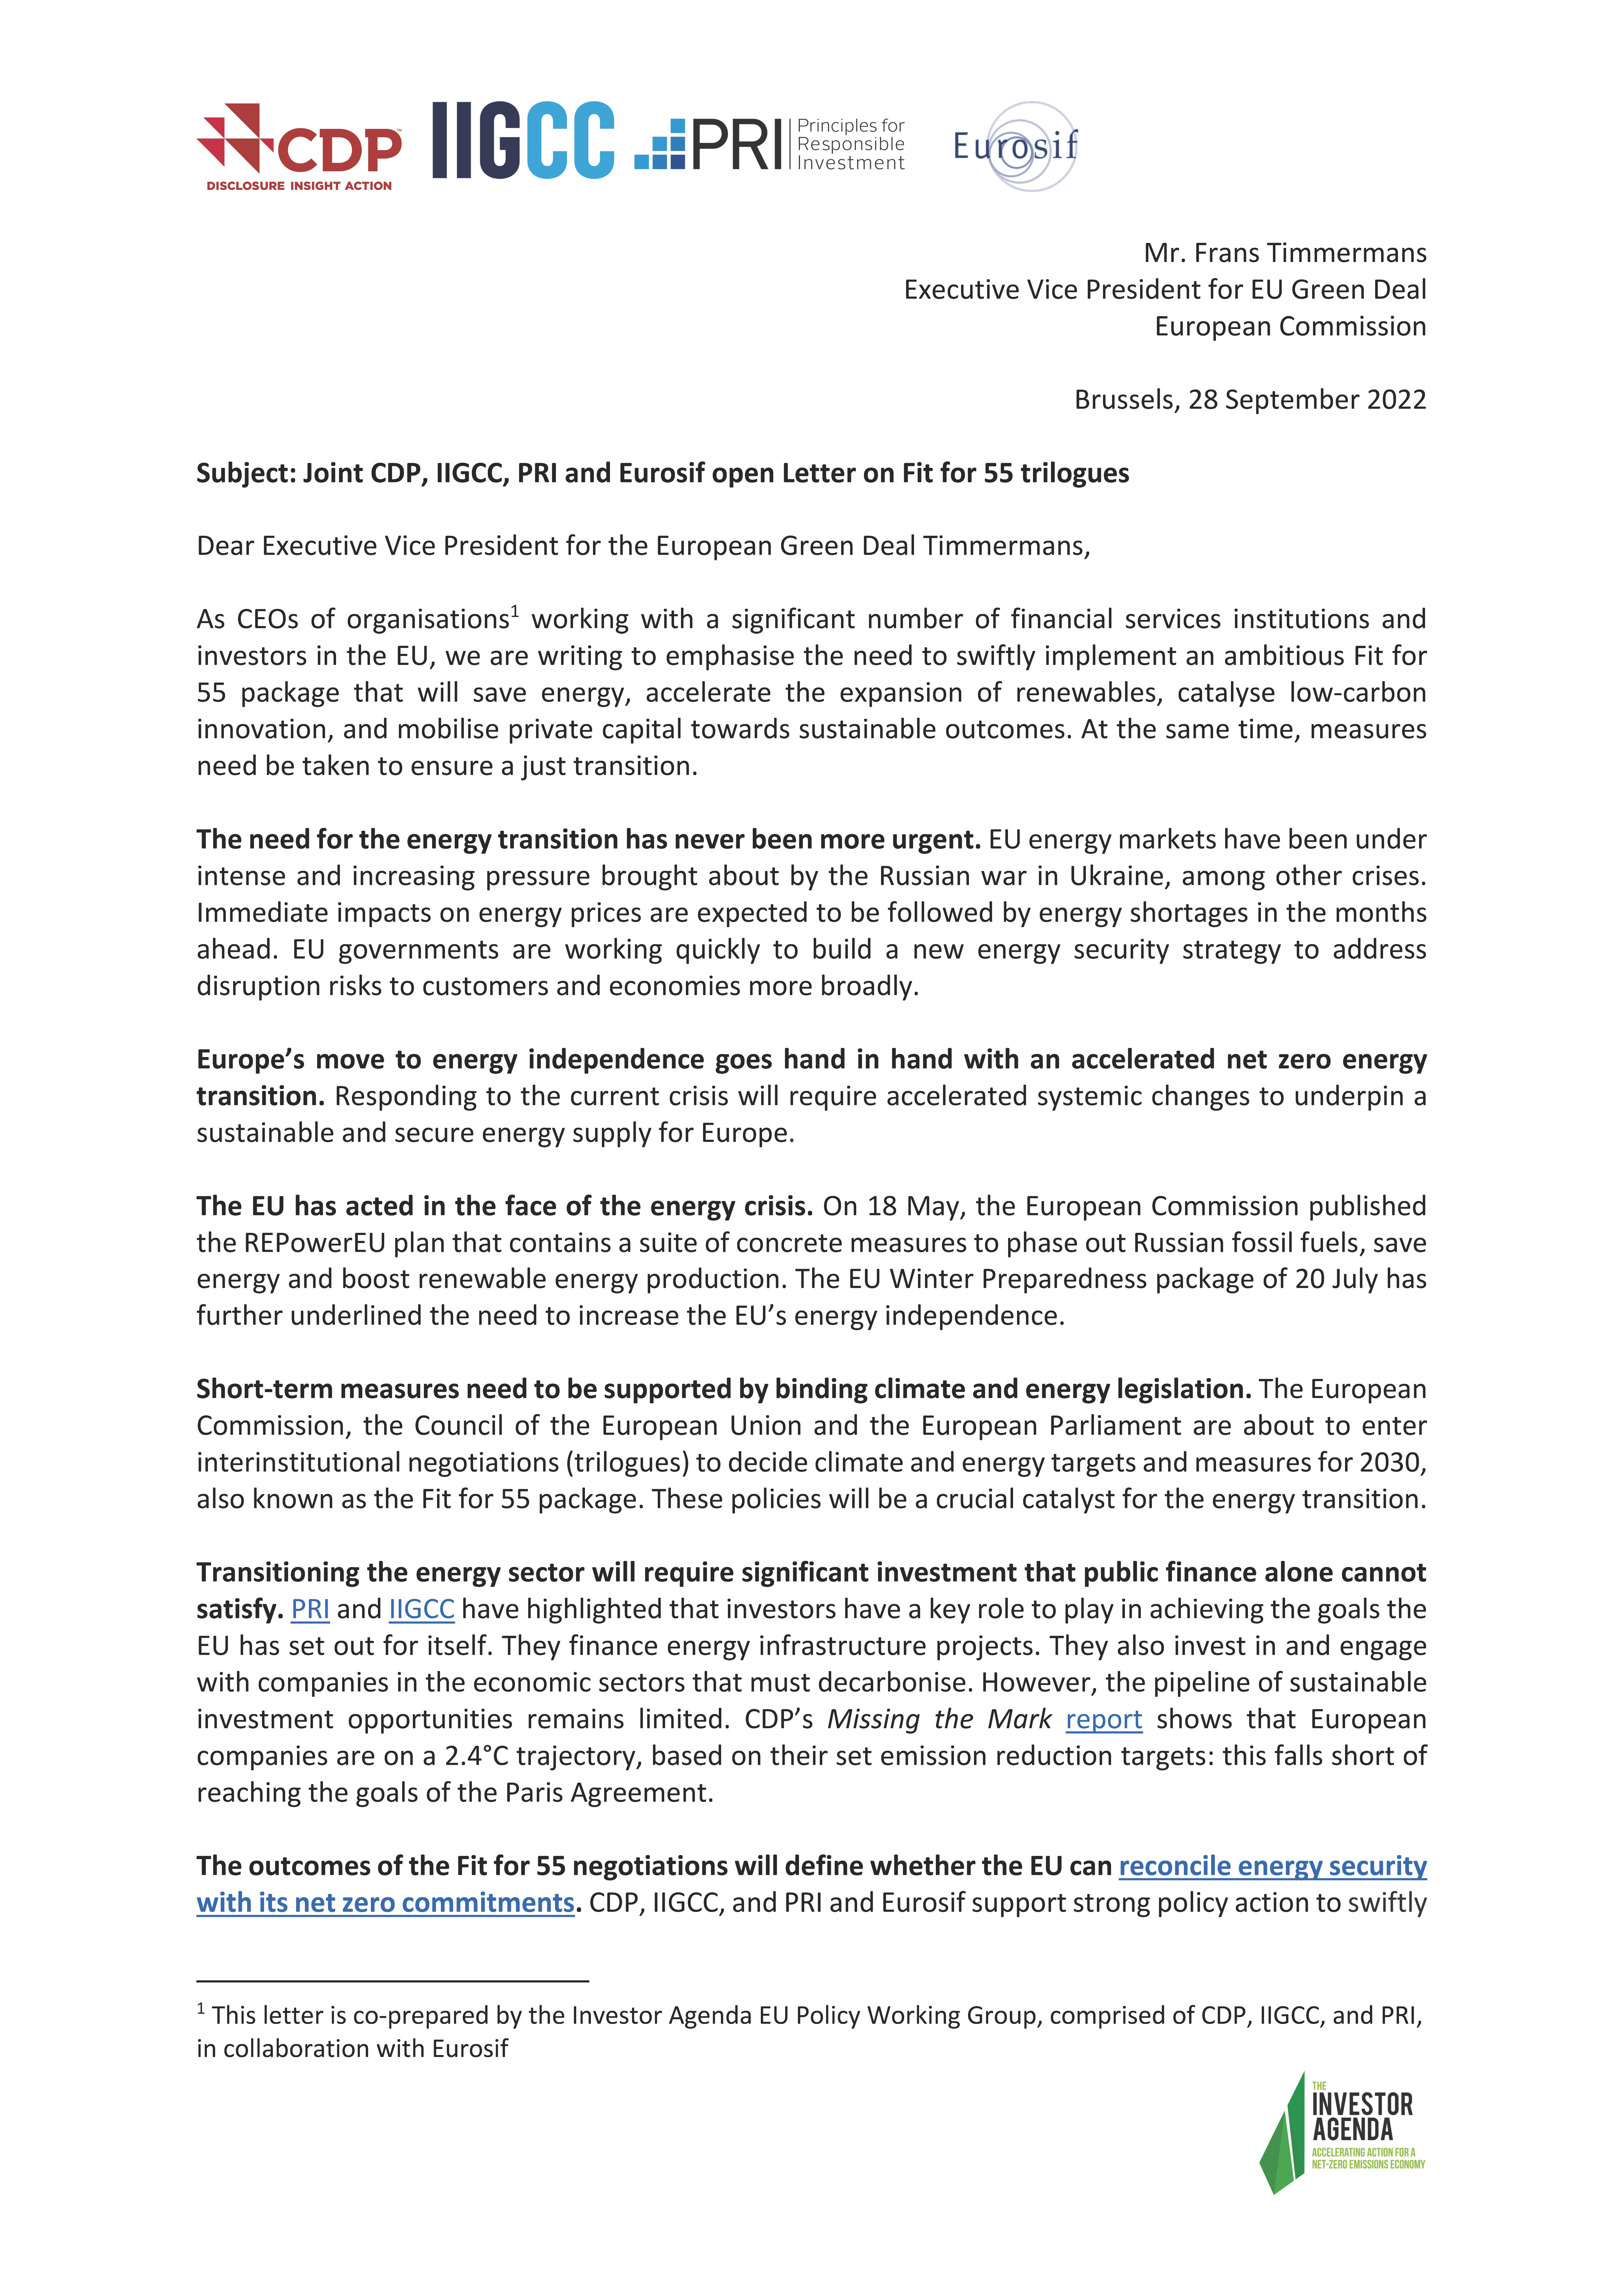 Joint CDP, IIGCC, PRI and Eurosif open Letter on Fit for 55 trilogues